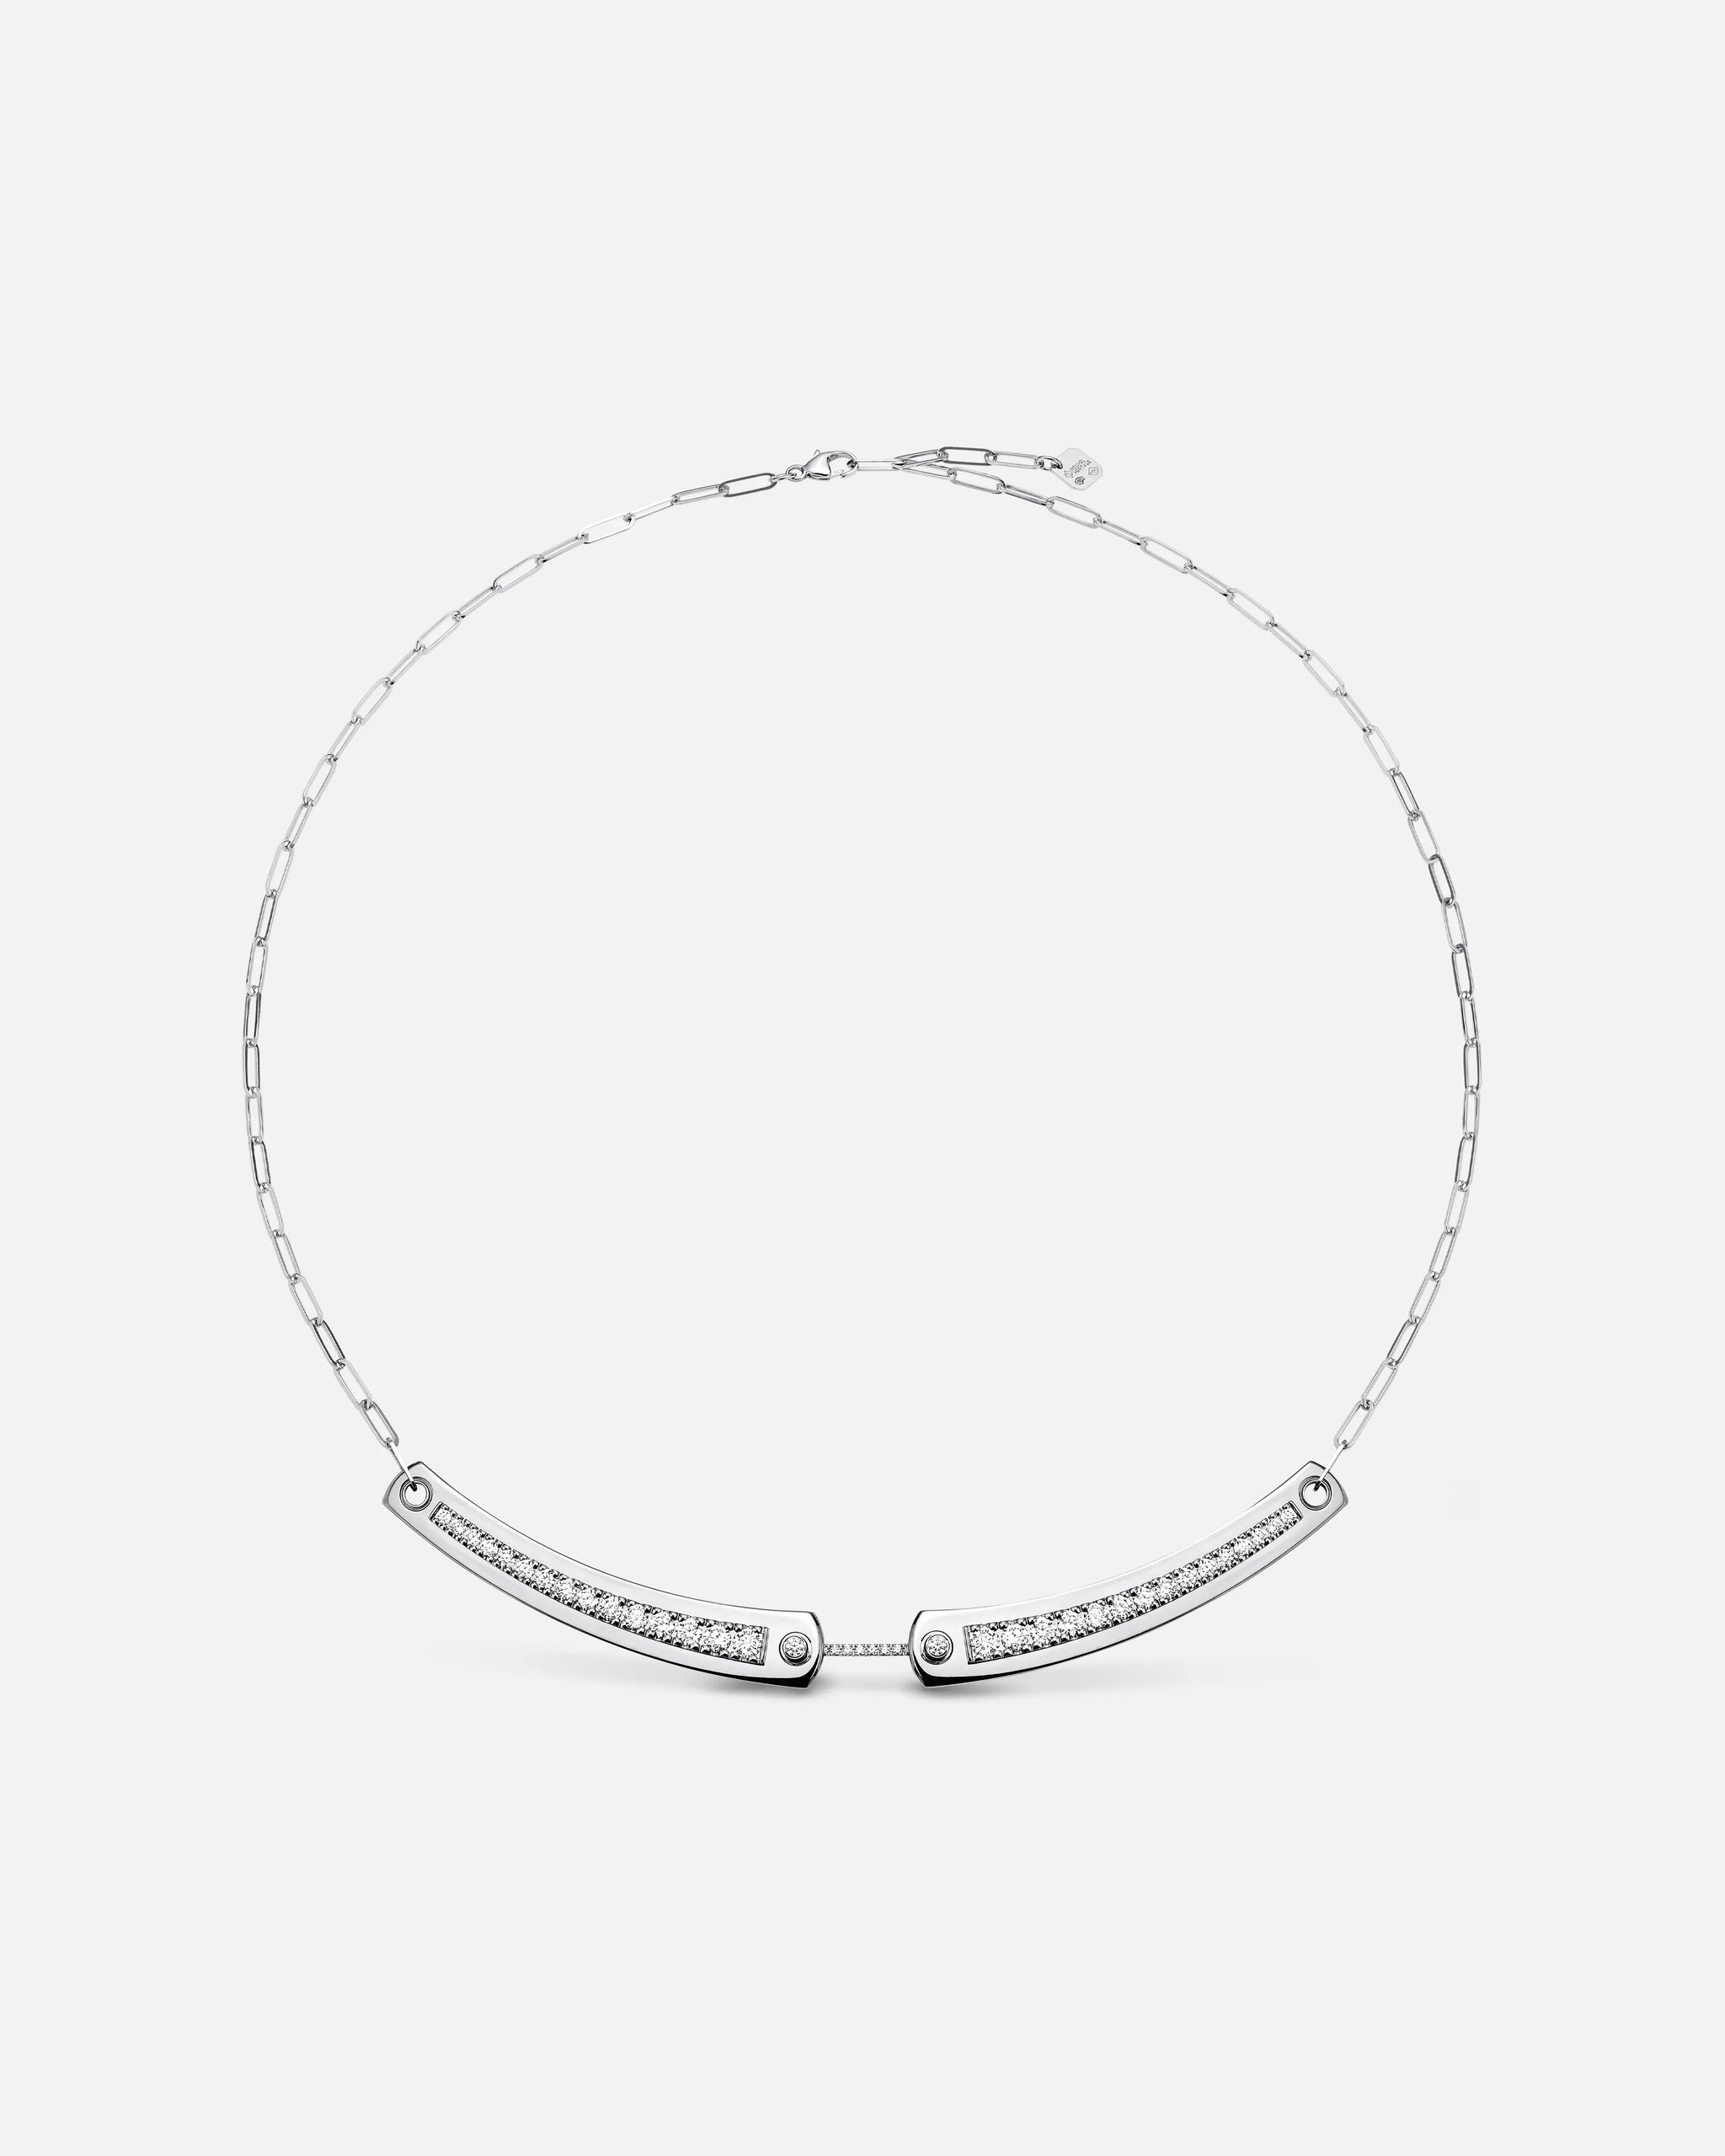 Tuxedo Mood Necklace in White Gold - 1 - Nouvel Heritage